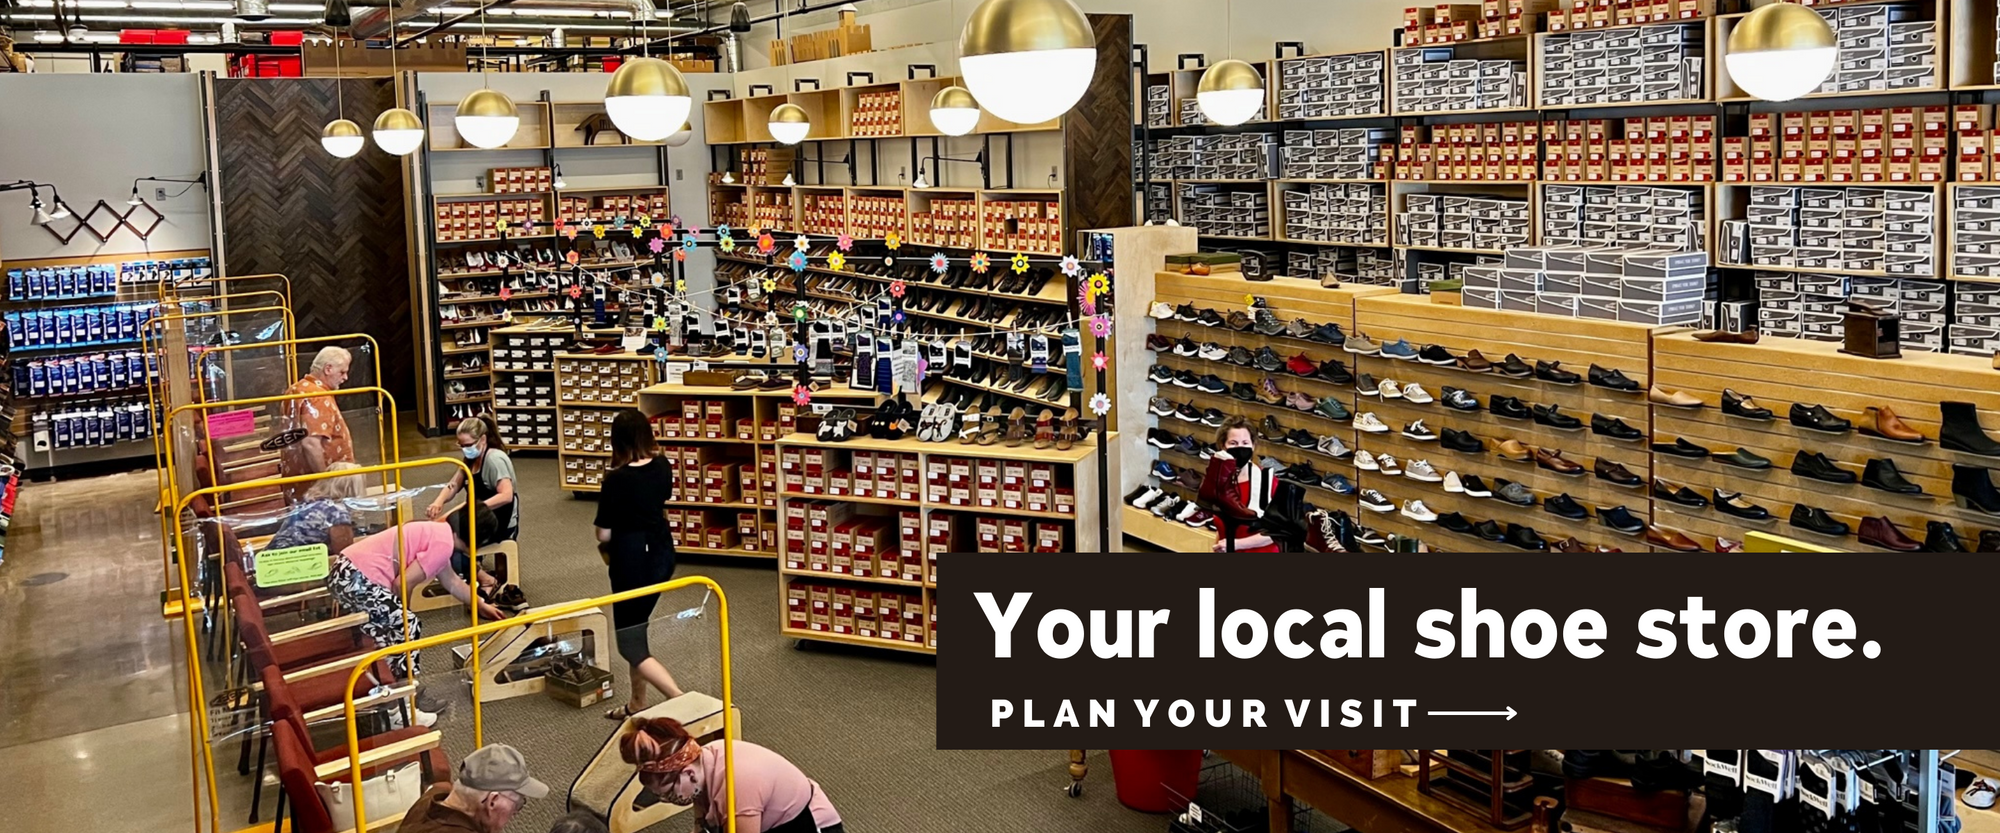 Your local shoe store. Plan your visit now.